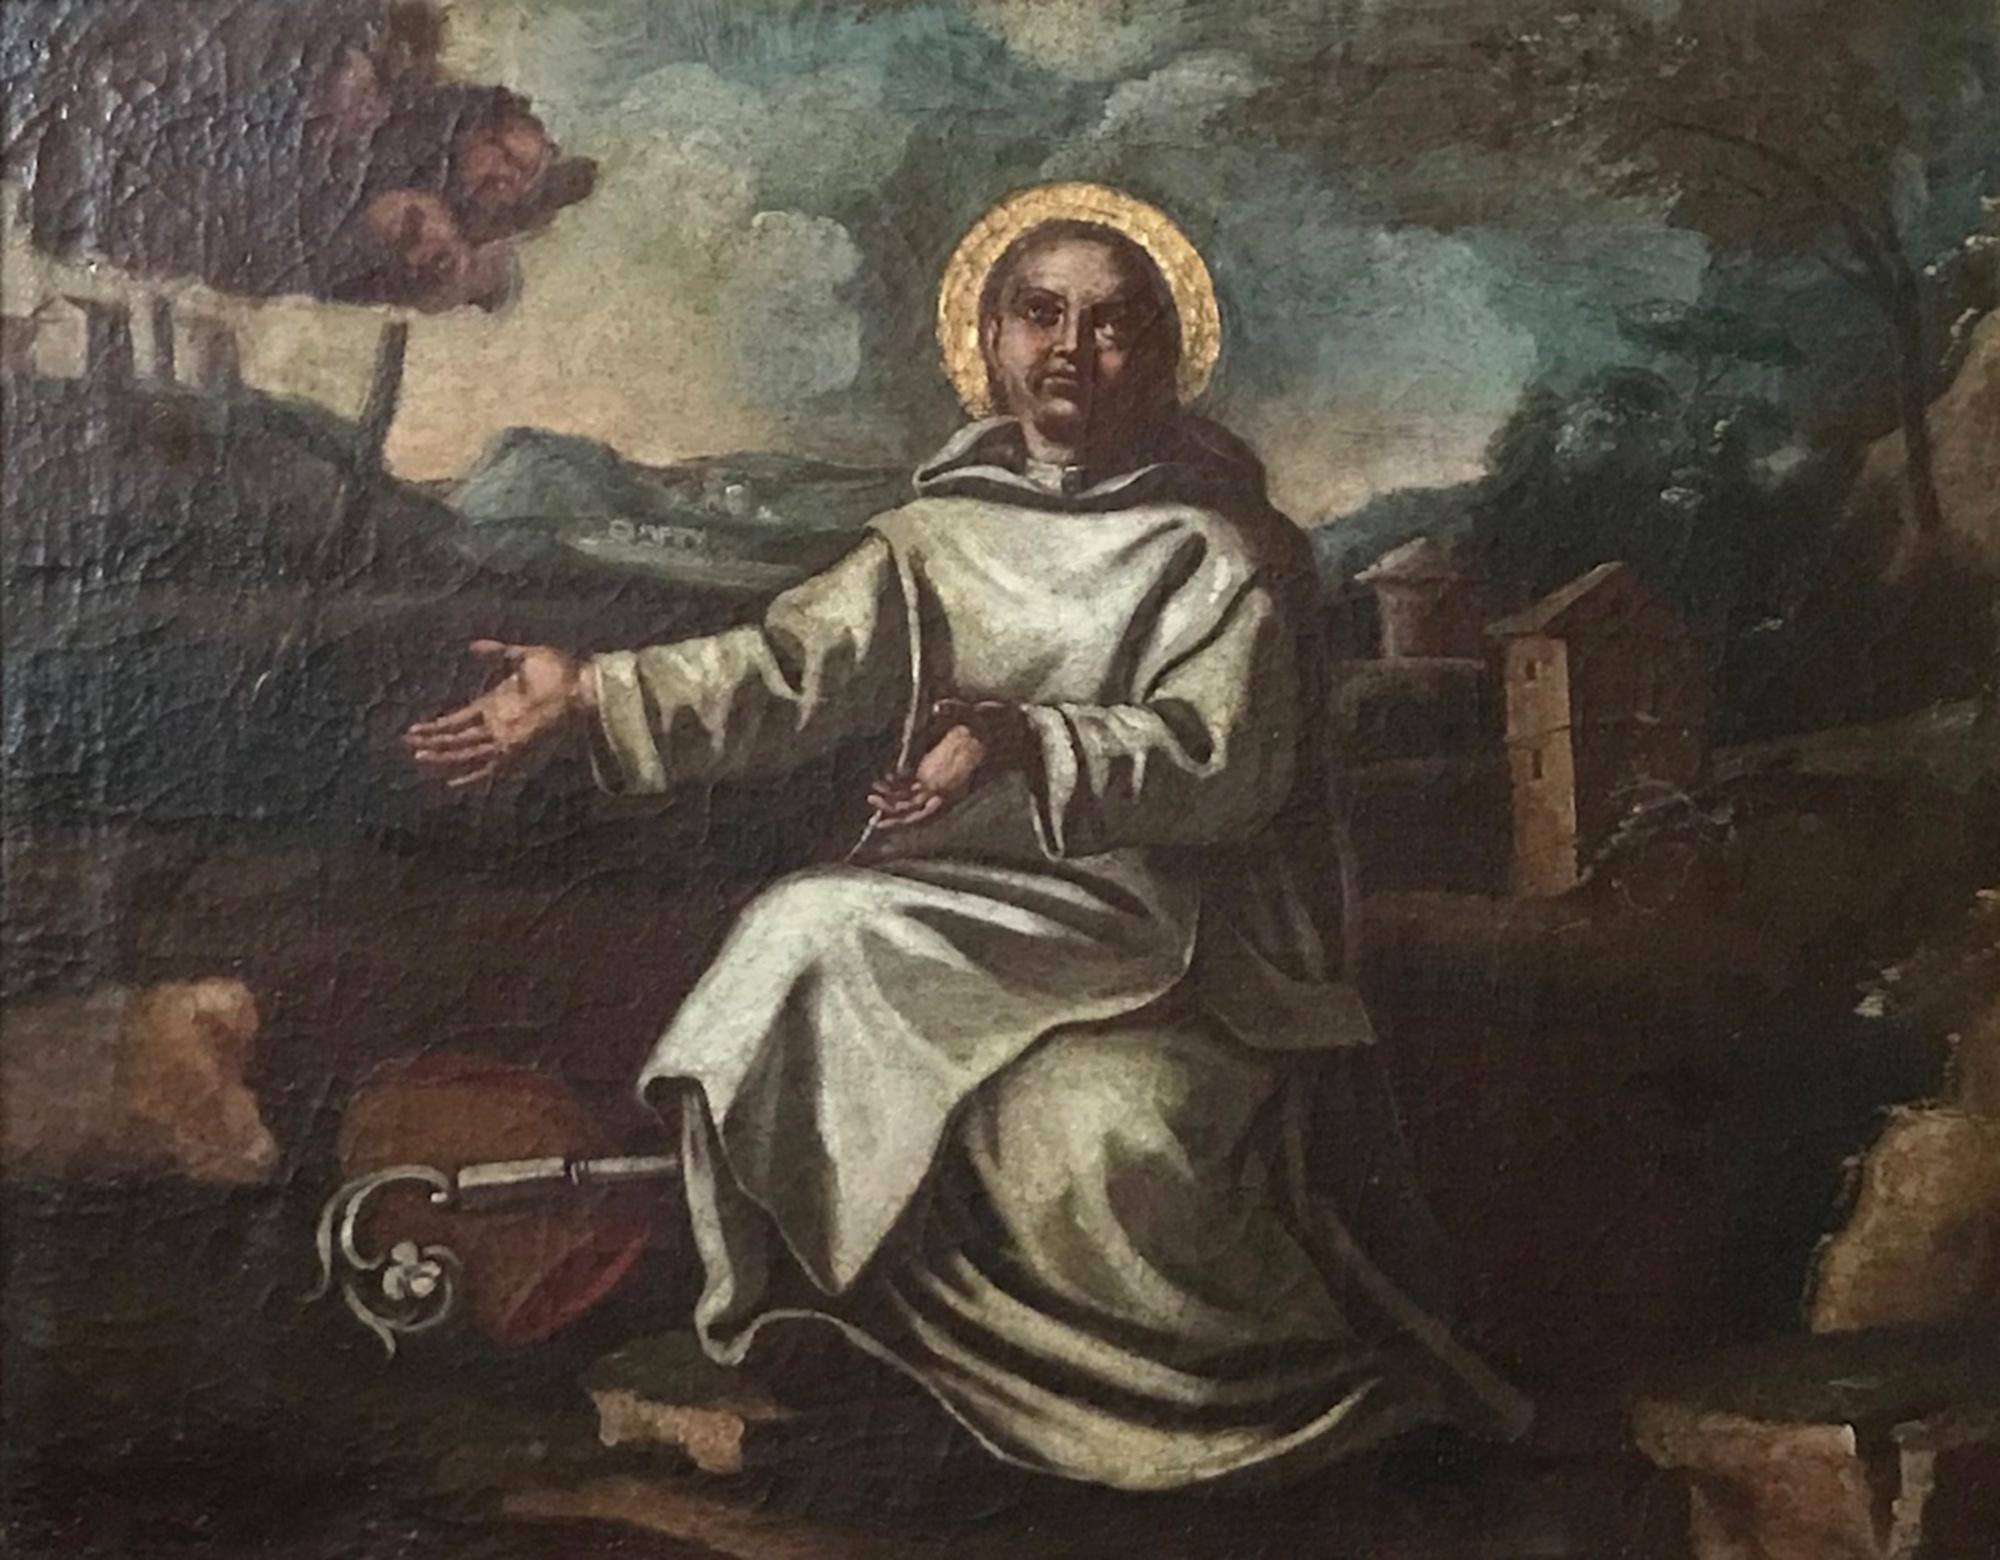 17th century old master oil painting of Saint Bernard of Clairvaux. Spanish school.

Dramatic expression and perfect use of chiaroscuro, the art of light and shadow effects, makes this painting a masterpiece. Saint Bernard of Clairvaux, clad in a